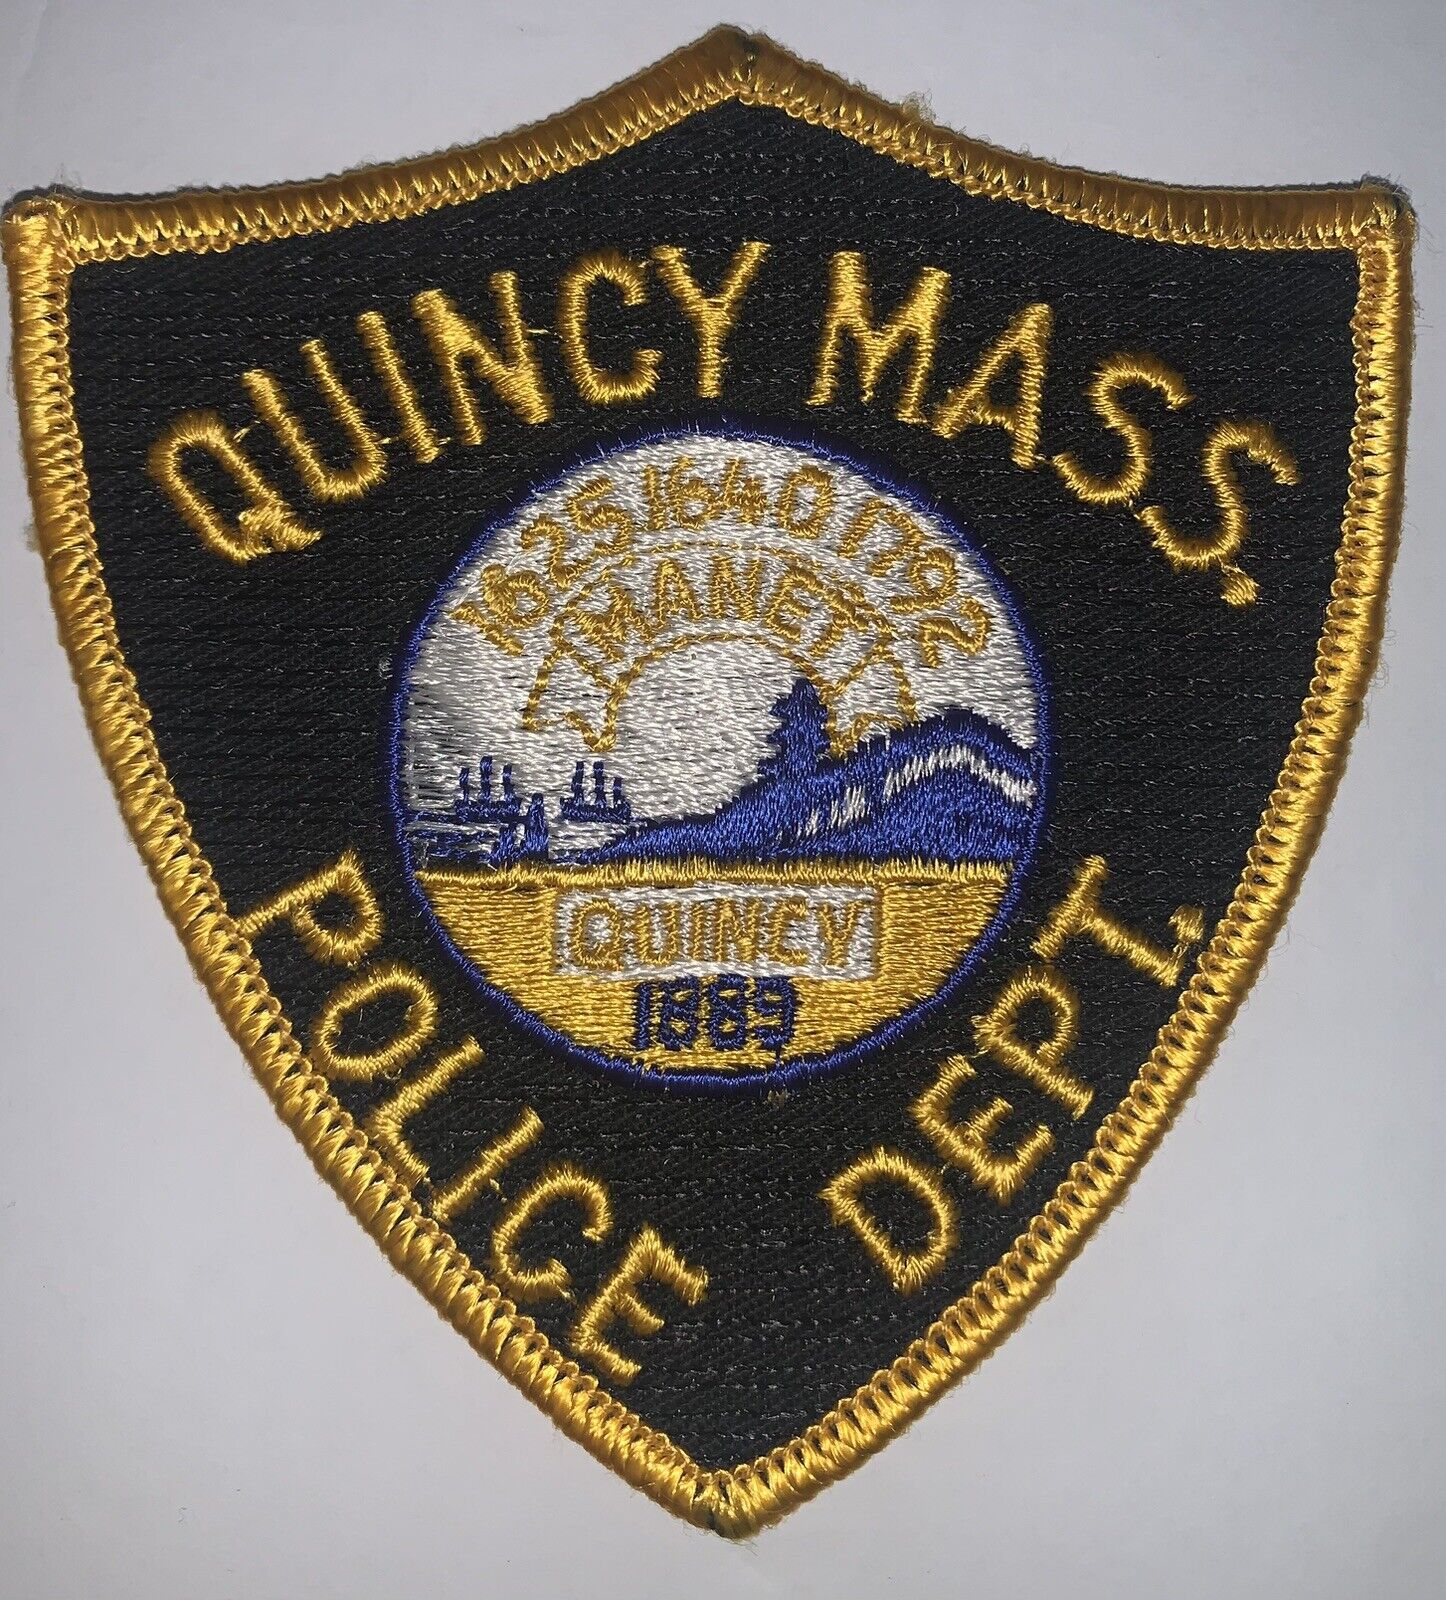 Vintage Quincy Mass MA Police Shoulder Patch Cheesecloth Backing